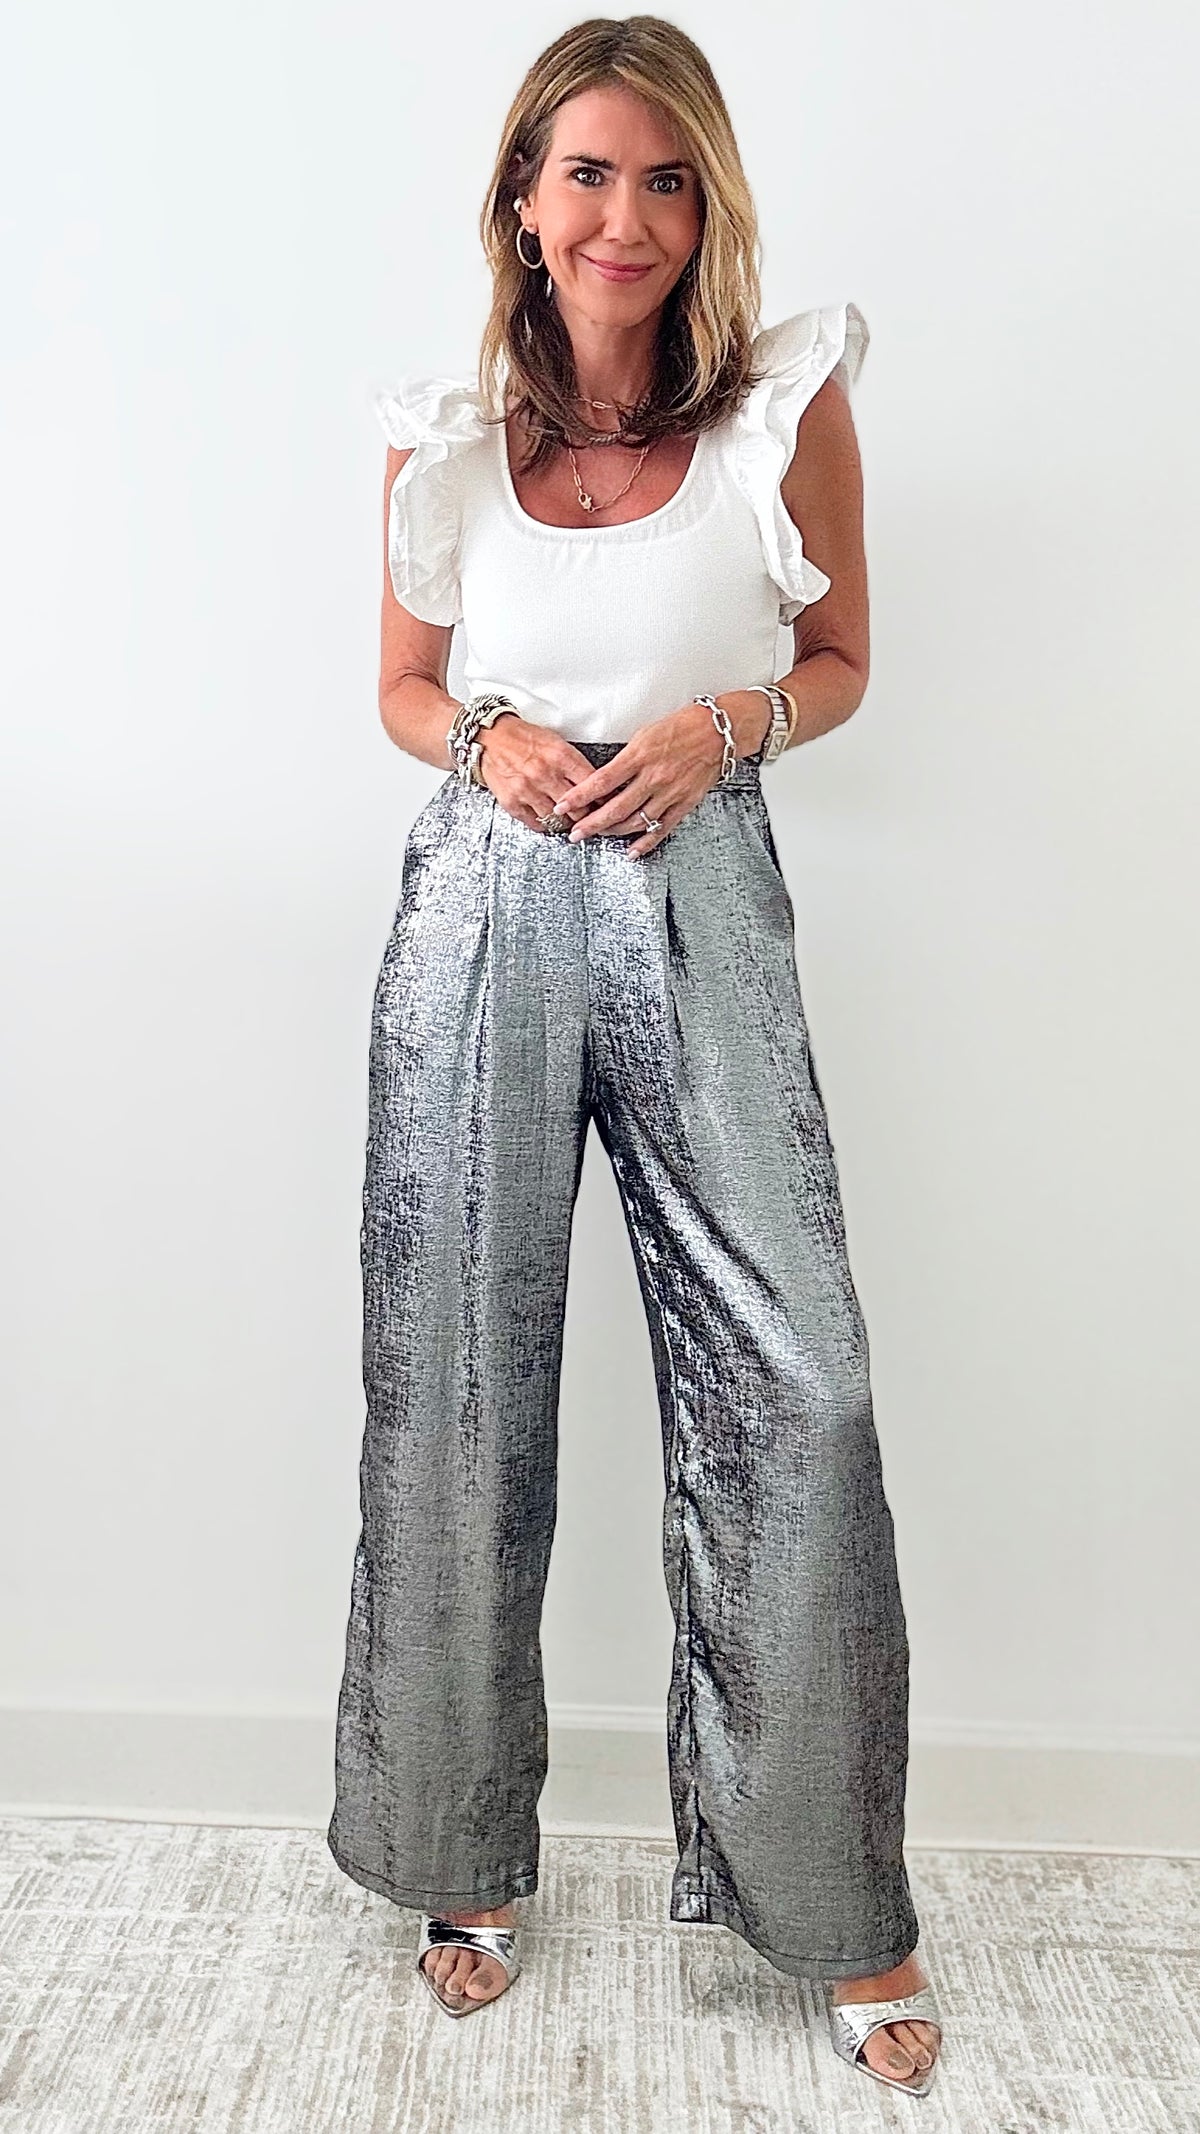 Metallic Wide Leg Pants - Metalic Greey /Black-170 Bottoms-original usa-Coastal Bloom Boutique, find the trendiest versions of the popular styles and looks Located in Indialantic, FL